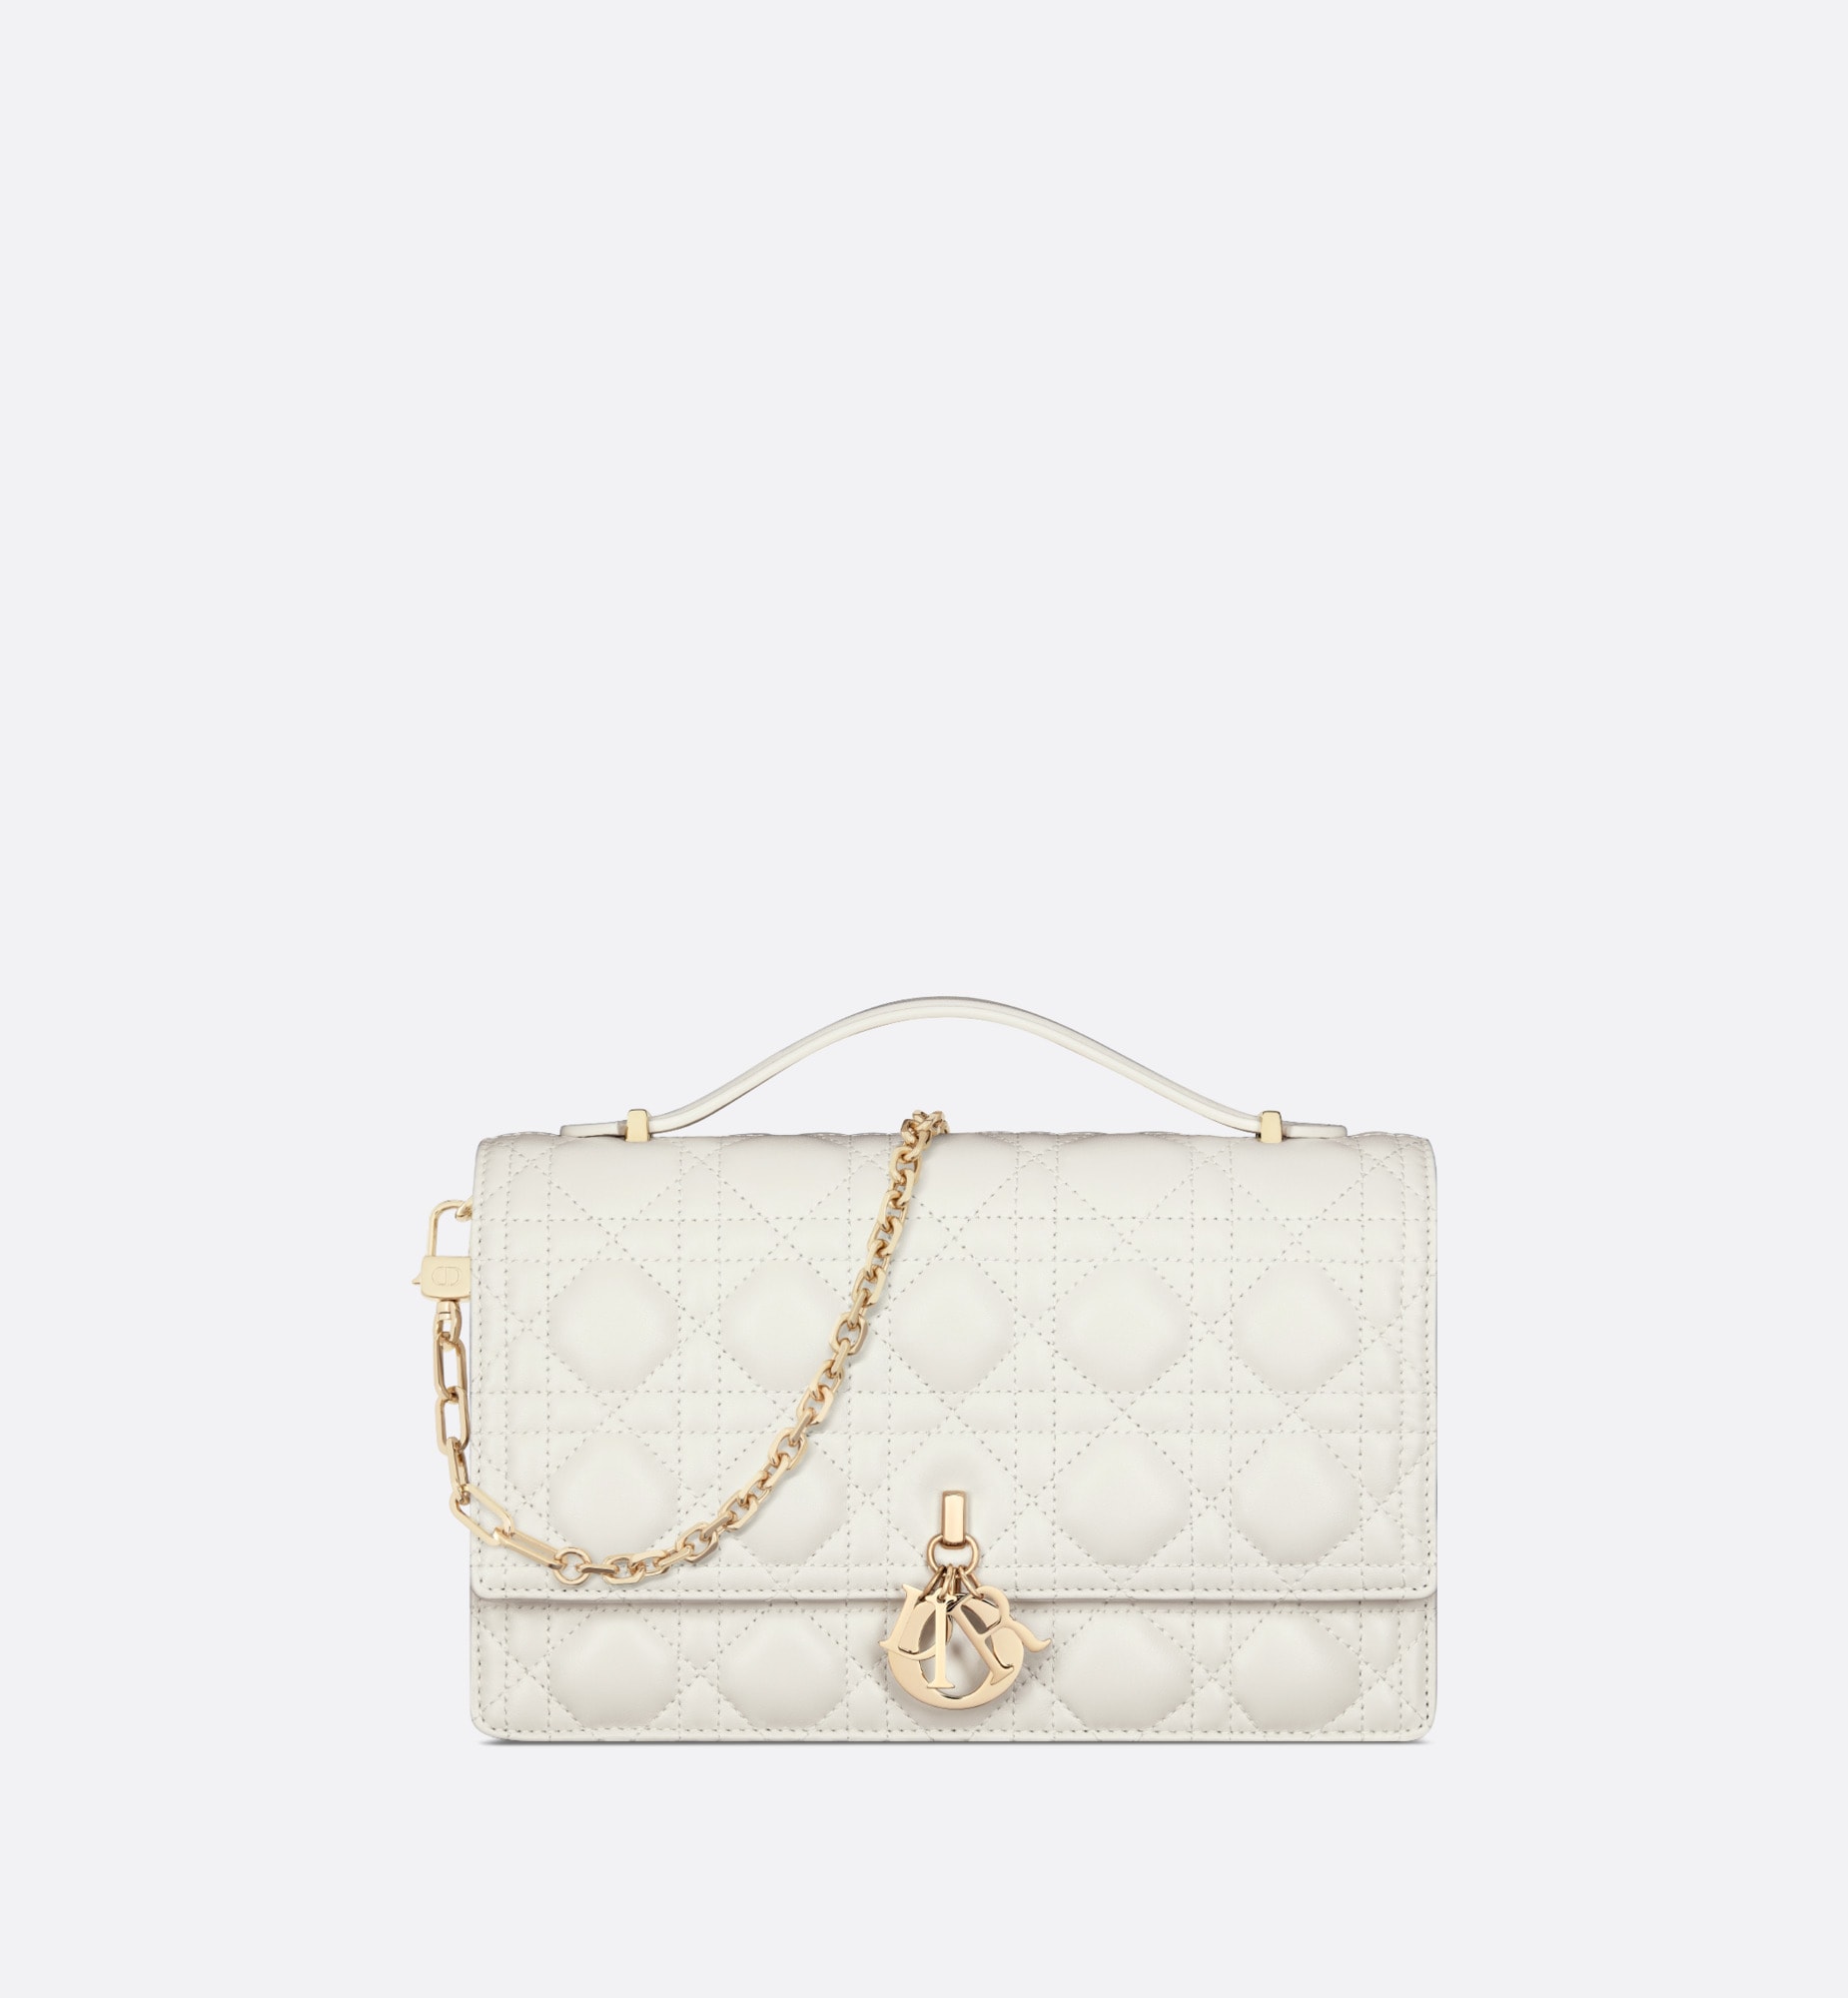 Miss dior top handle bag latte cannage lambskin